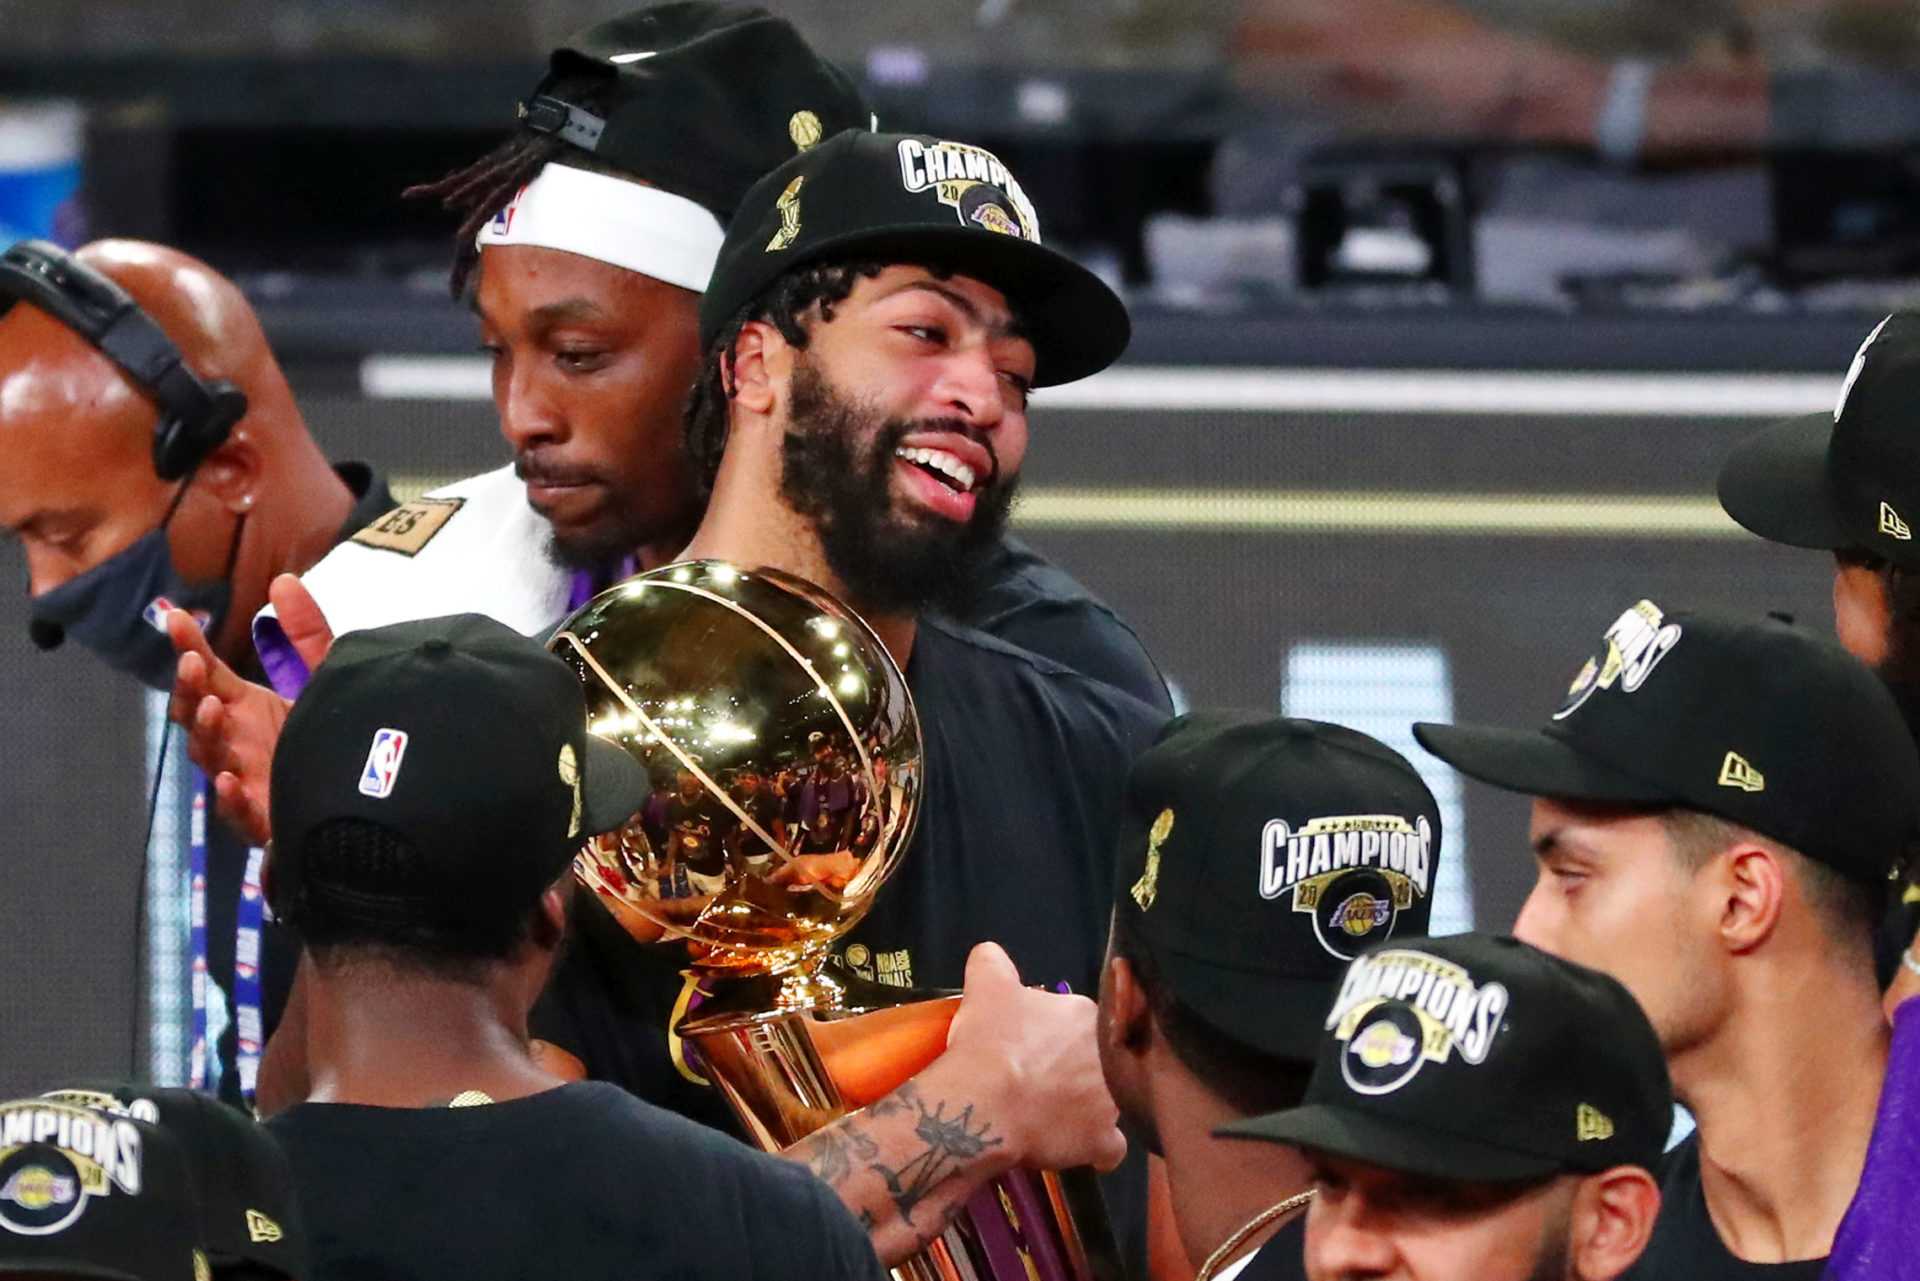 Anthony Davis Made a Surprise Facetime From Inside the Lockeroom After Championship Win